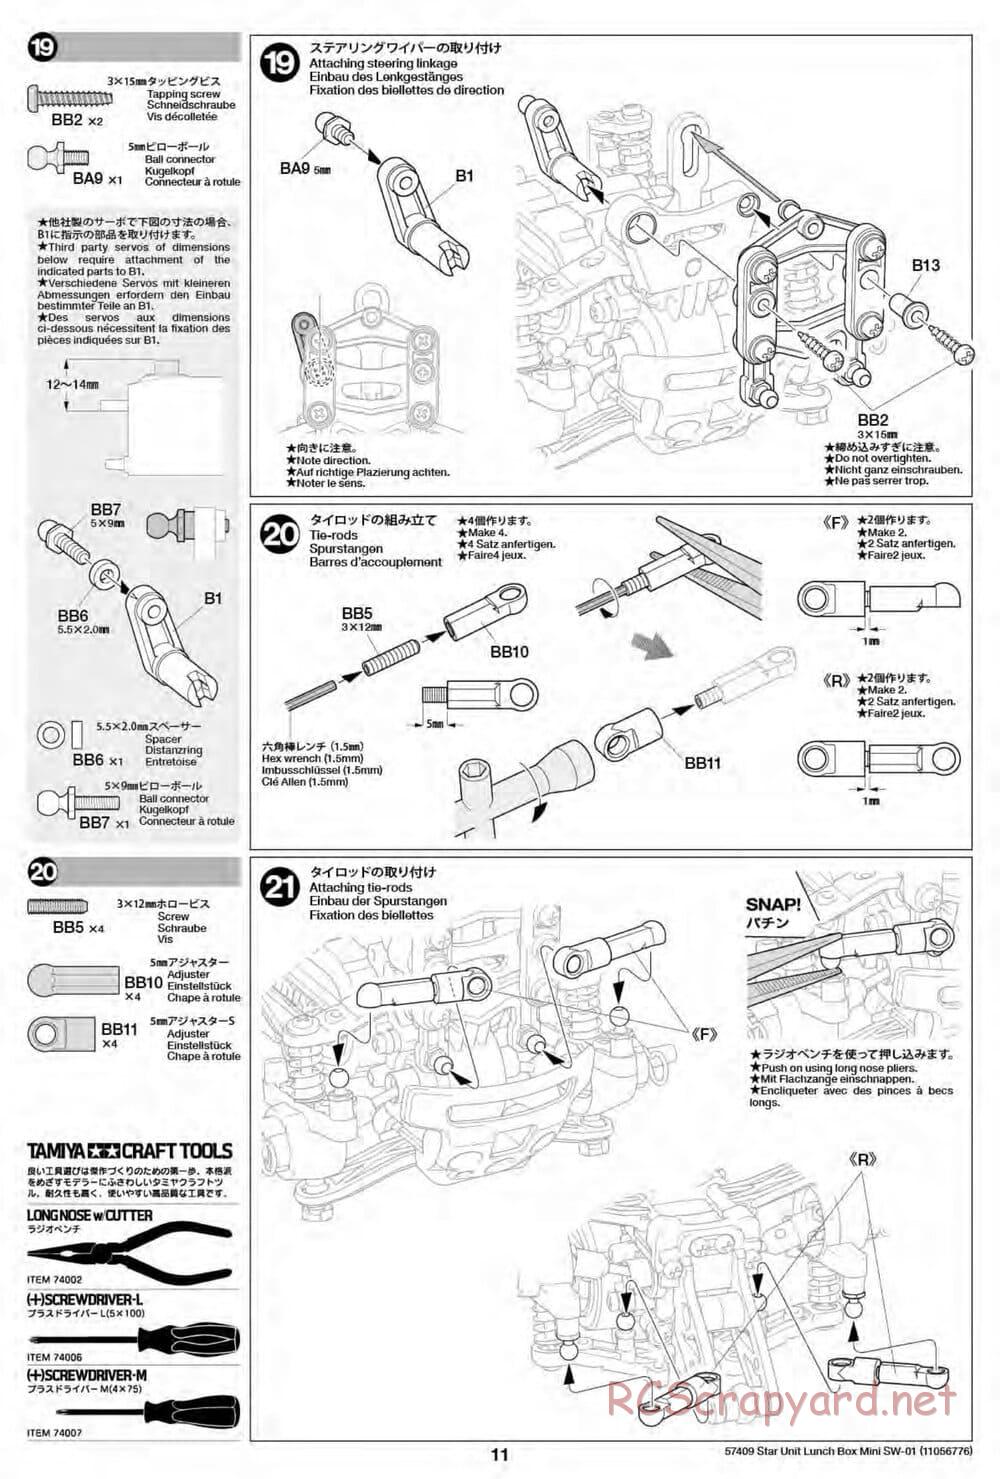 Tamiya - Lunch Box Mini - SW-01 Chassis - Manual - Page 11